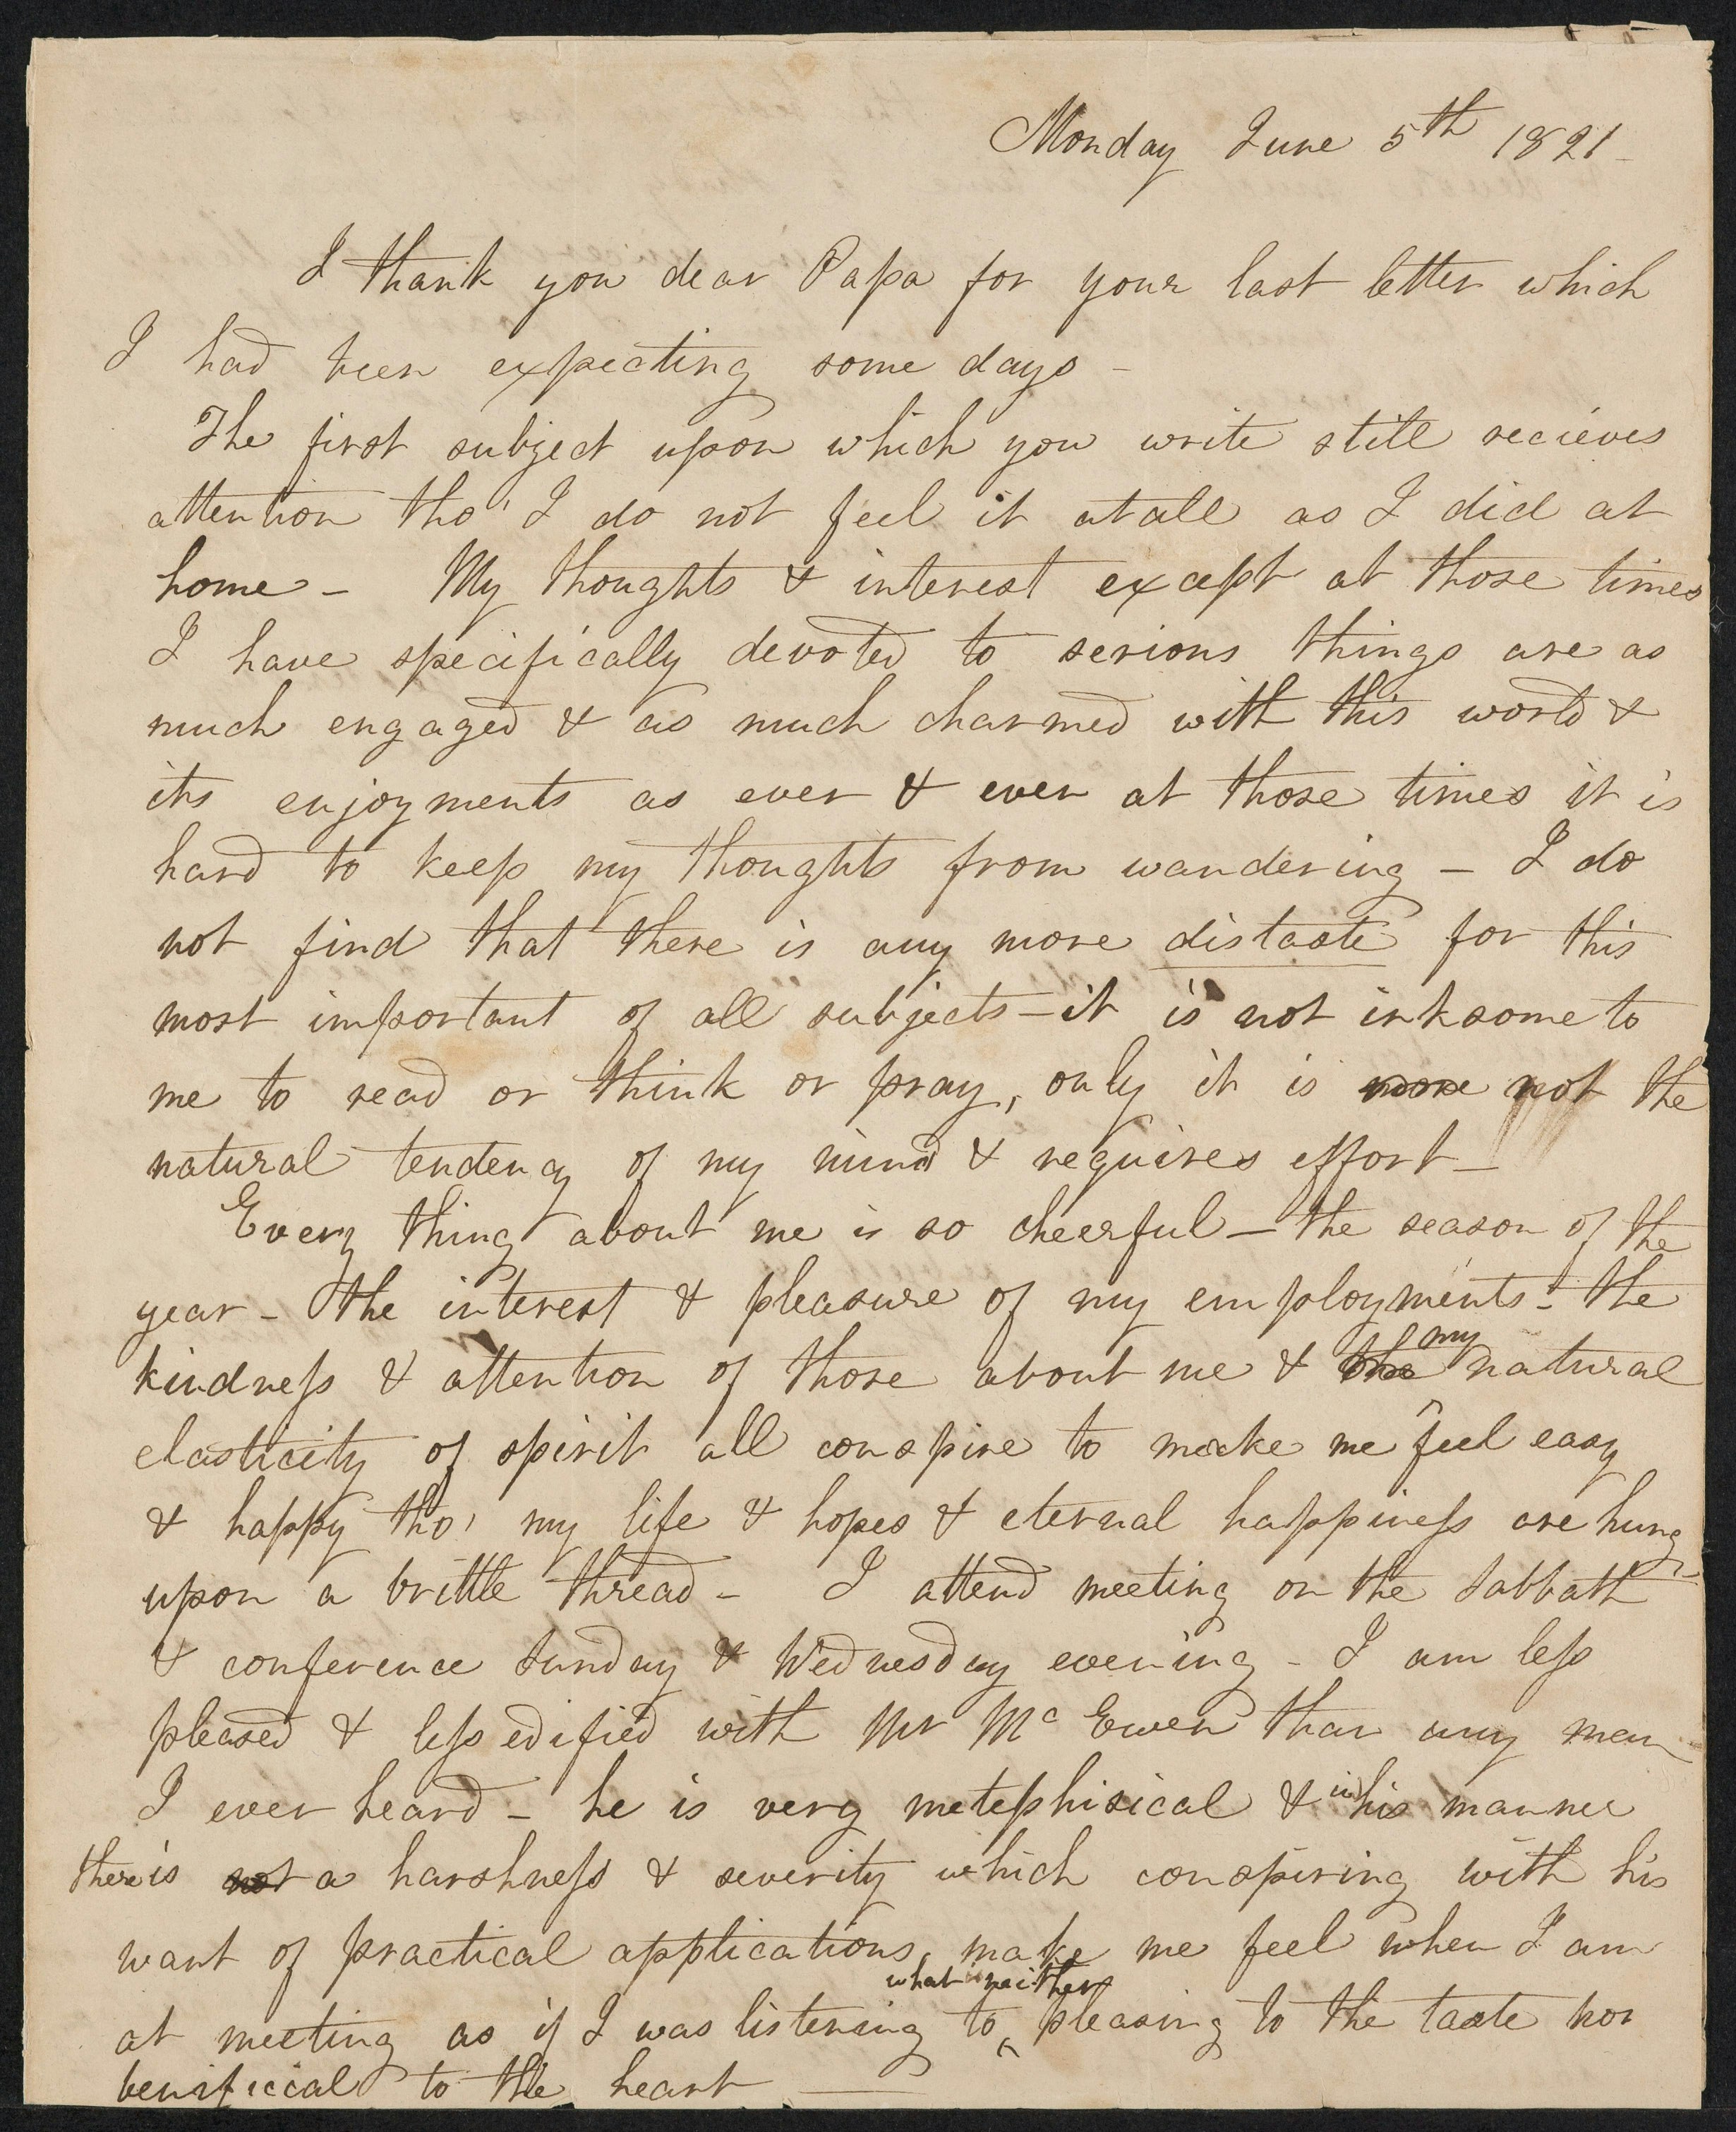 Letter to Lyman, June 5, 1821, concerning her courtship with Fisher